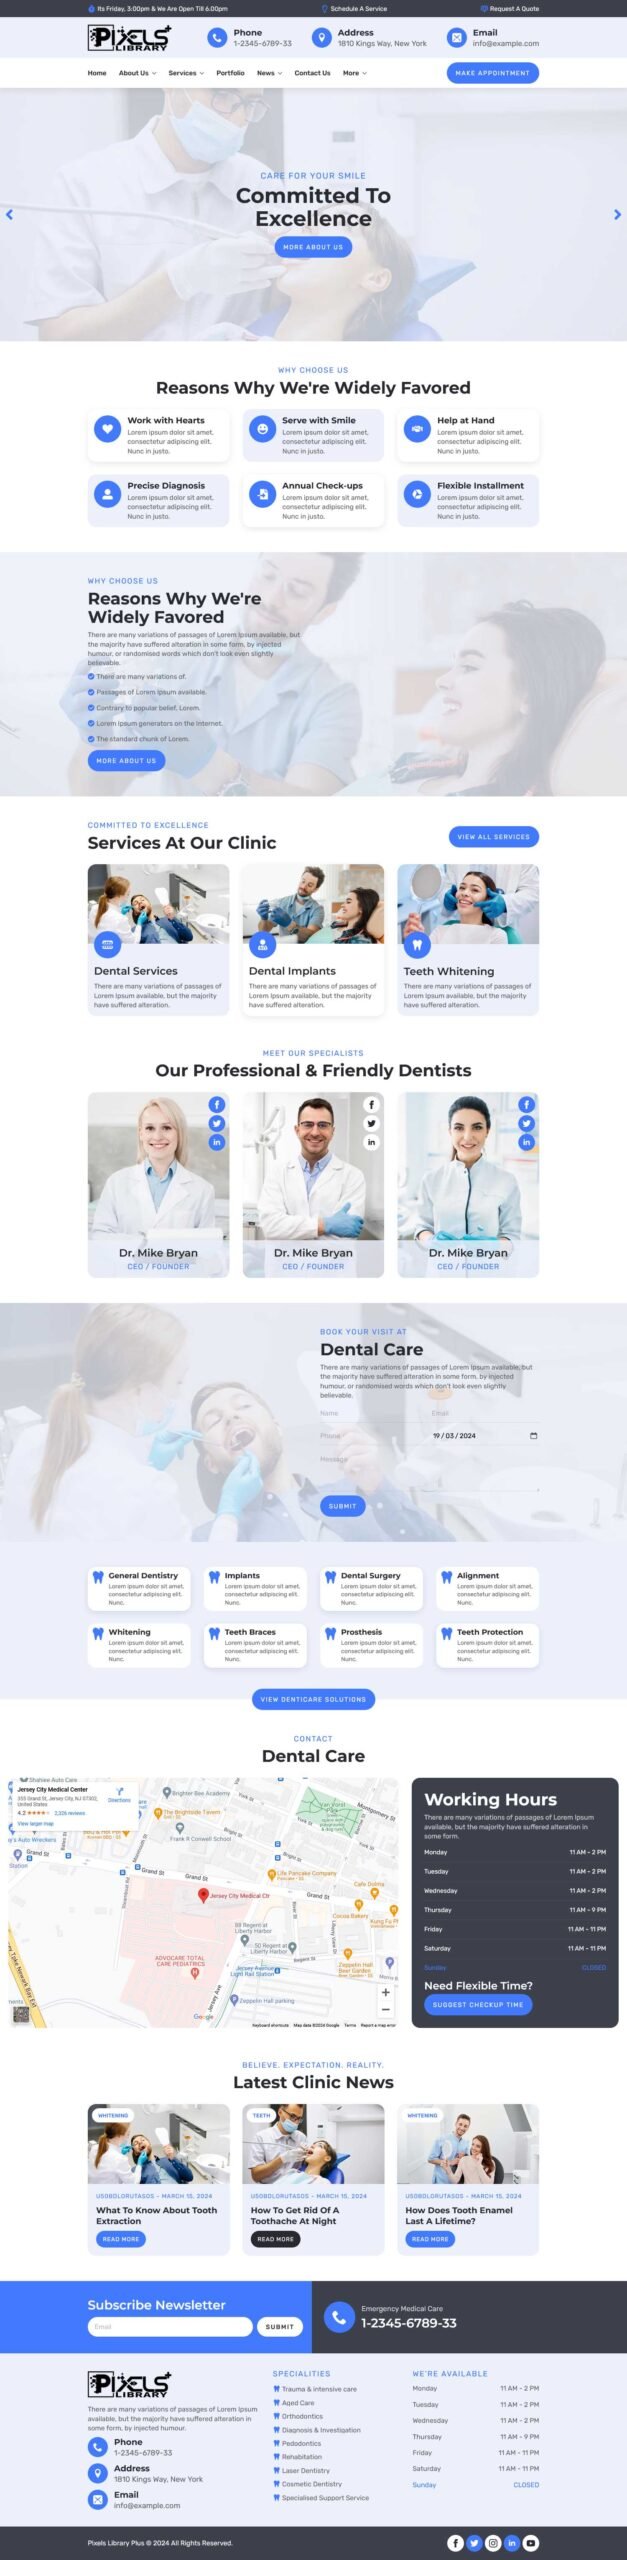 Breakdance Dental Care Layouts Pack SC